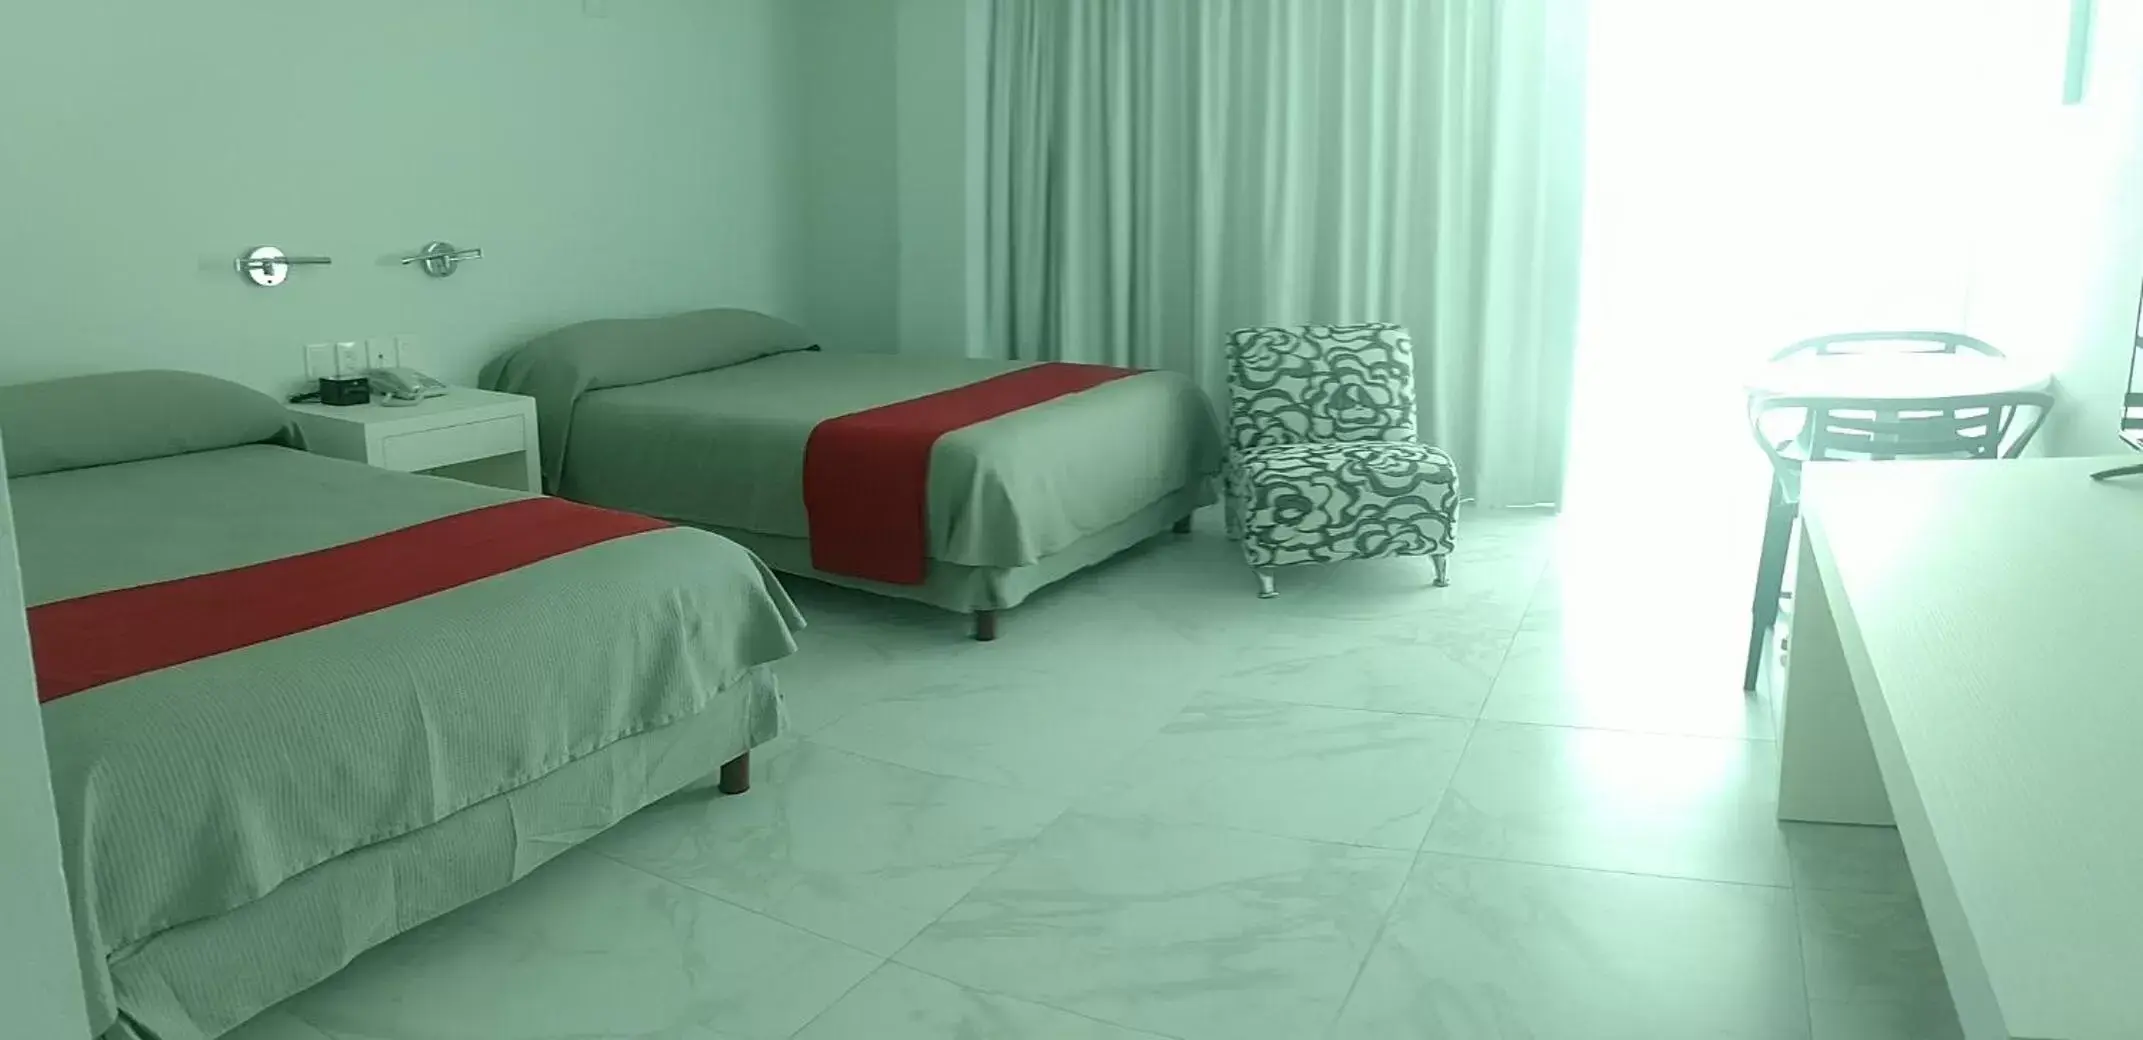 Bed in We Hotel Acapulco